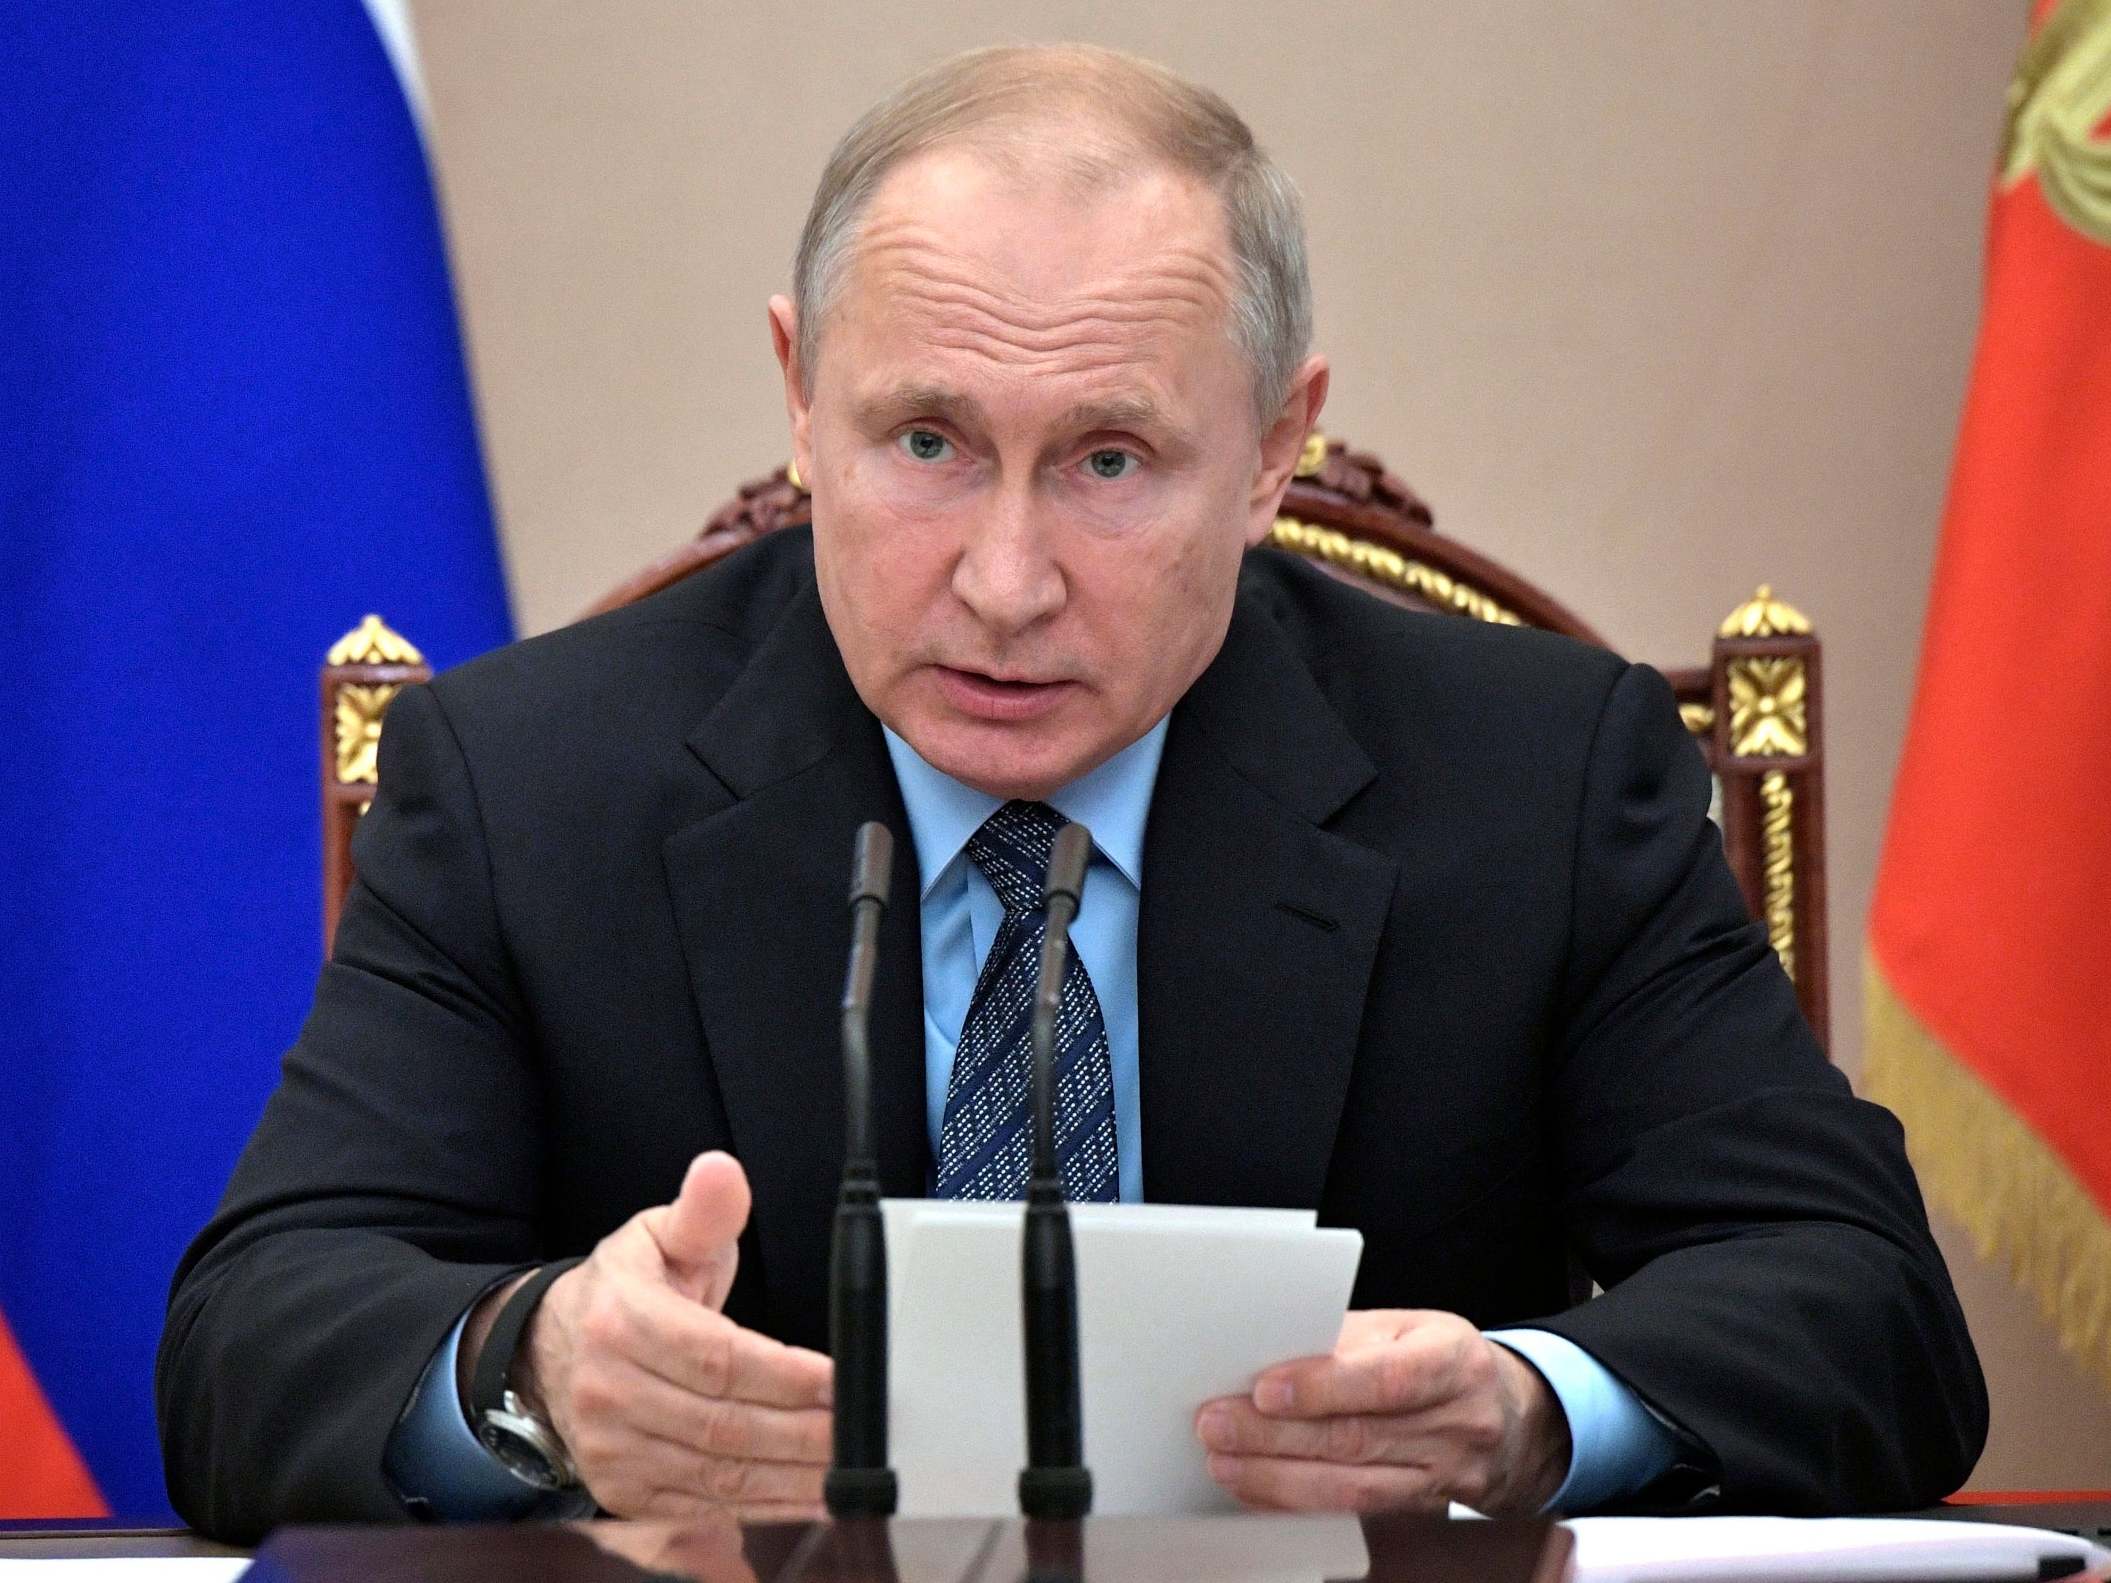 Mr Putin plainly believes himself to be on the right side of some great tide of events